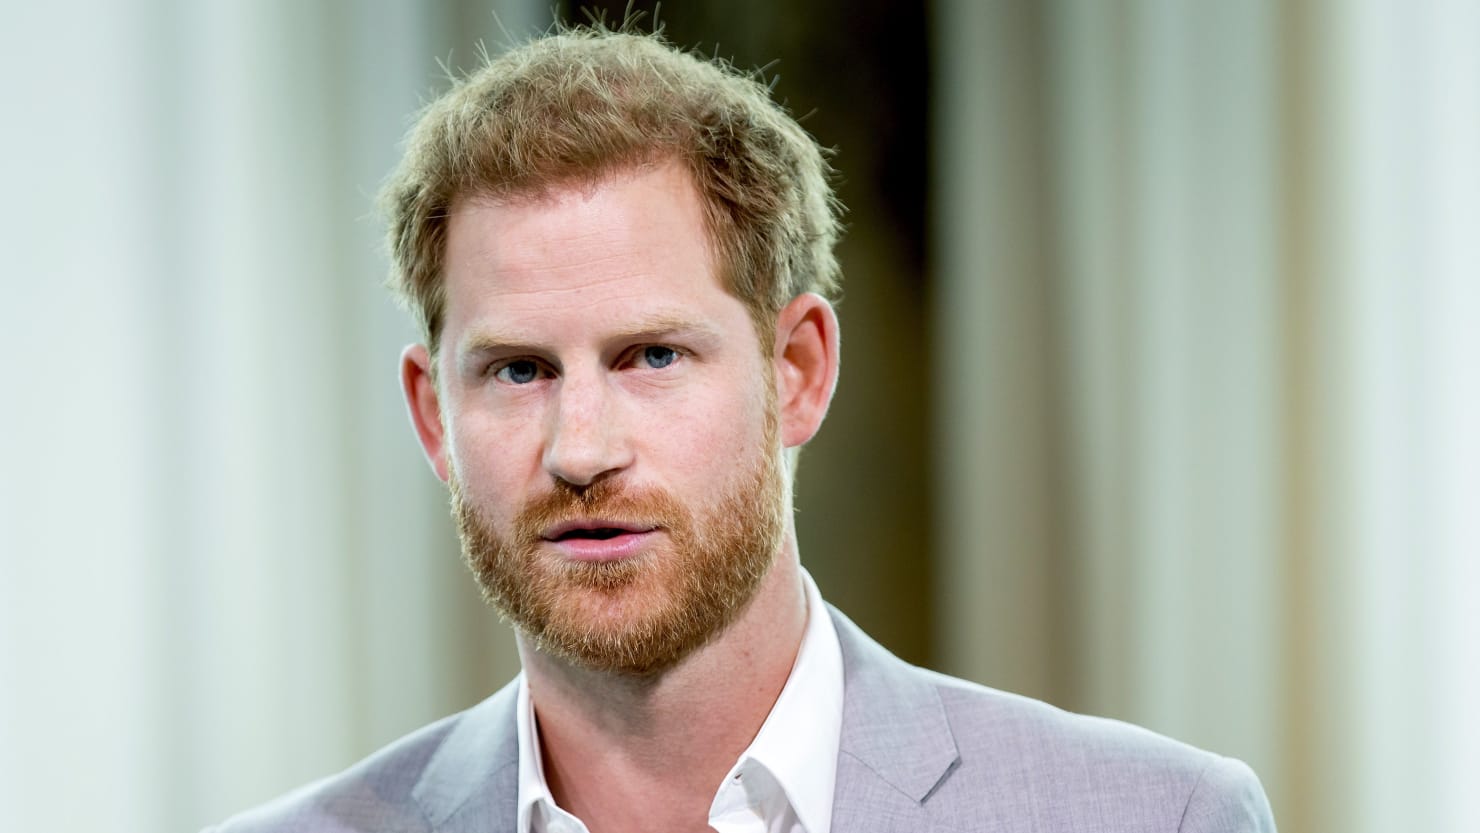 Prince Harry tells his friend James Corden that he left the royal family because it was destroying his mental health